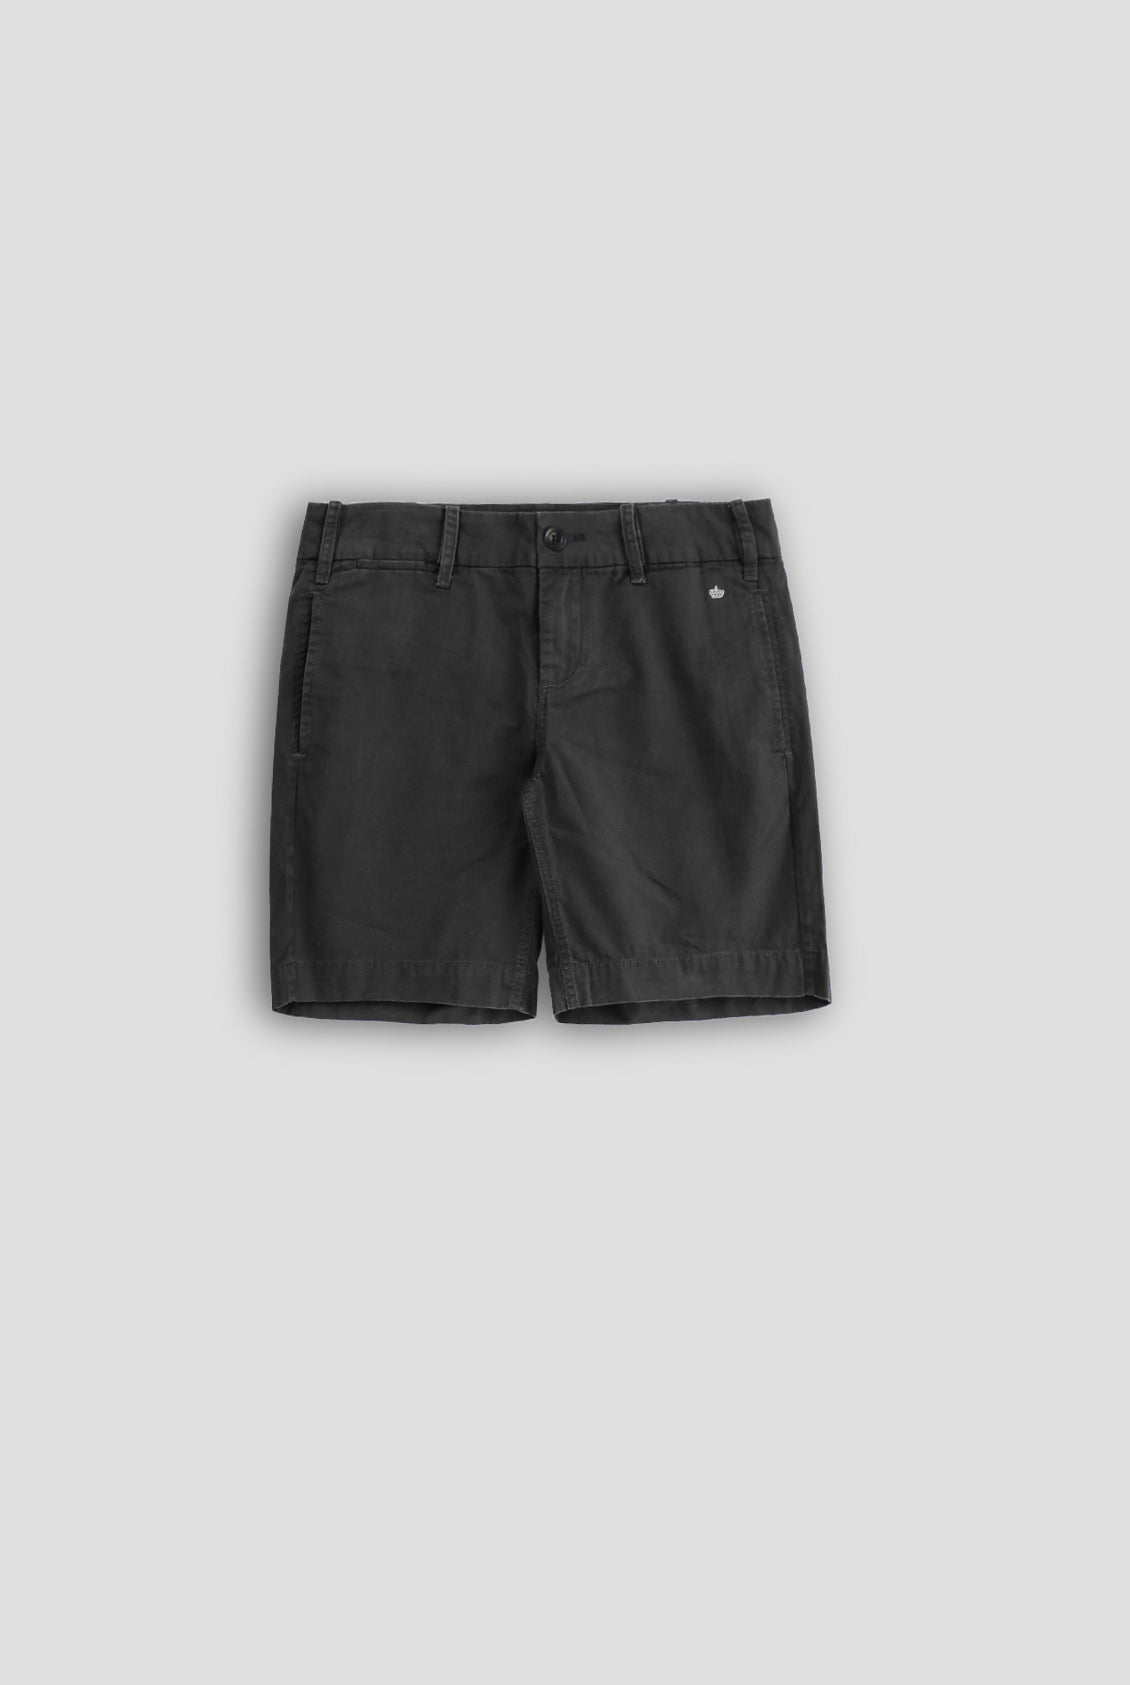 DAY SHORTS IN WASHED BLACK - Romi Boutique